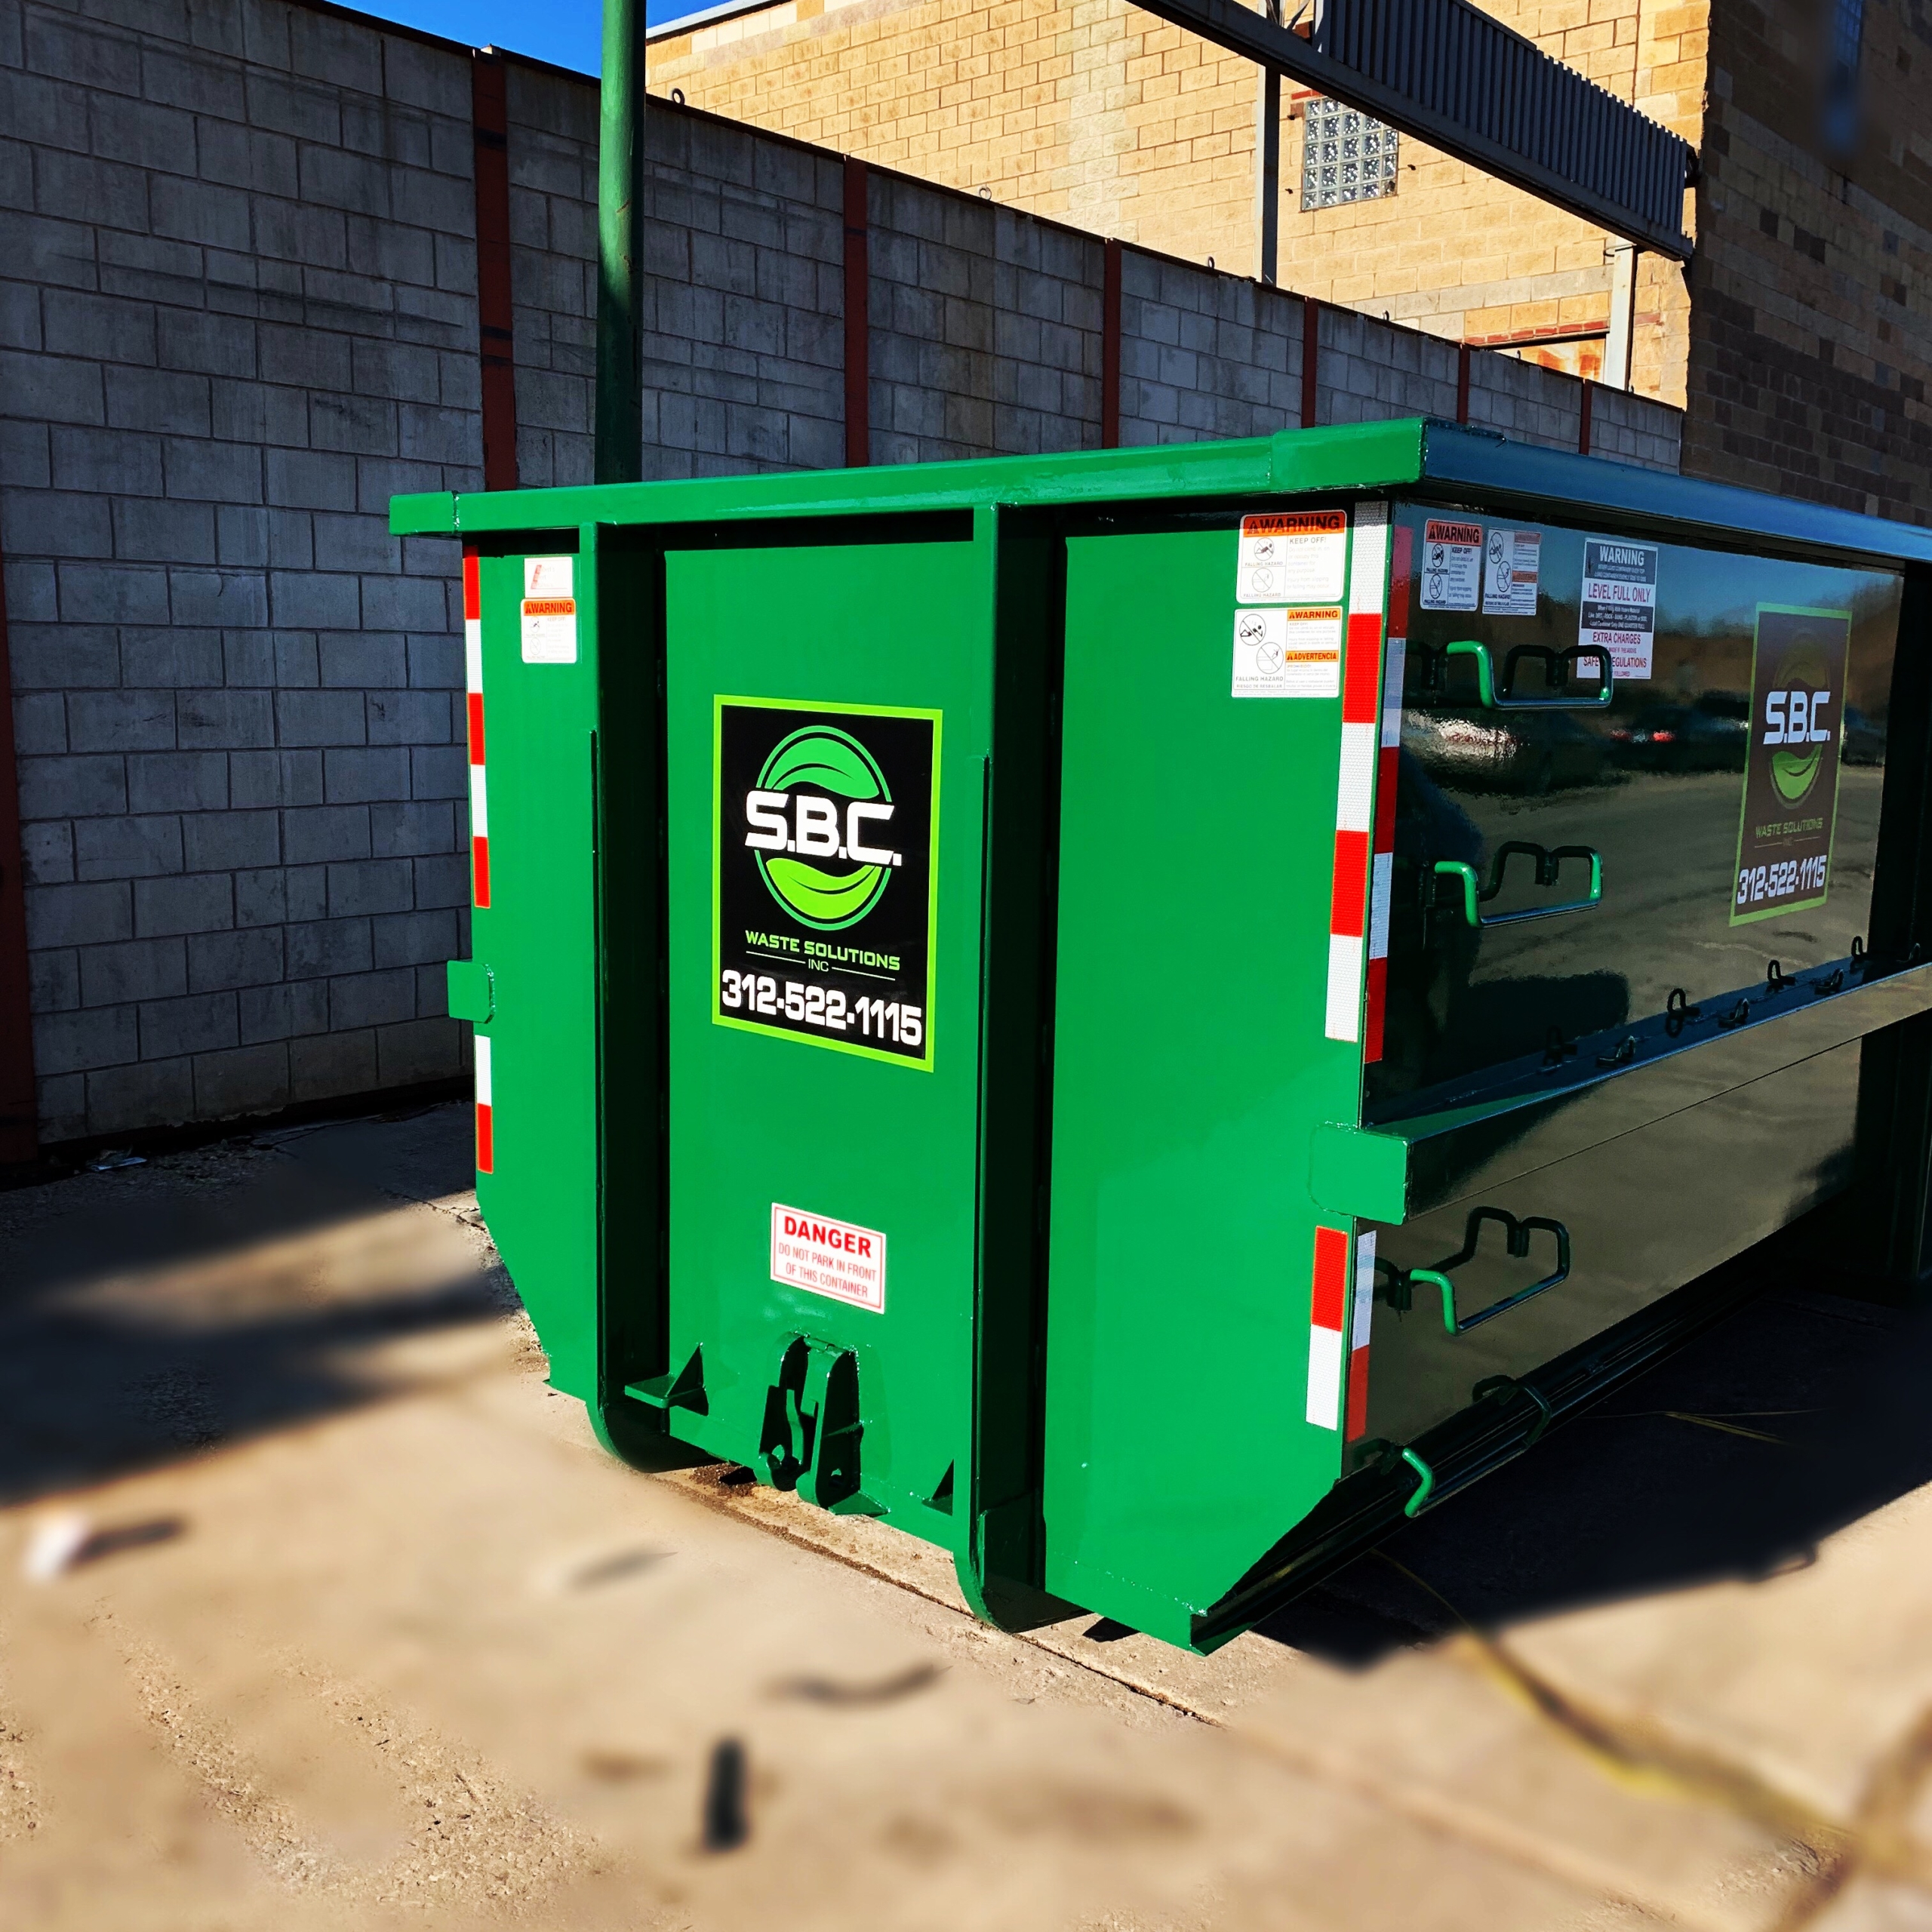 Image of a 10 yard commercial dumpster offered by SBC Waste Solutions.